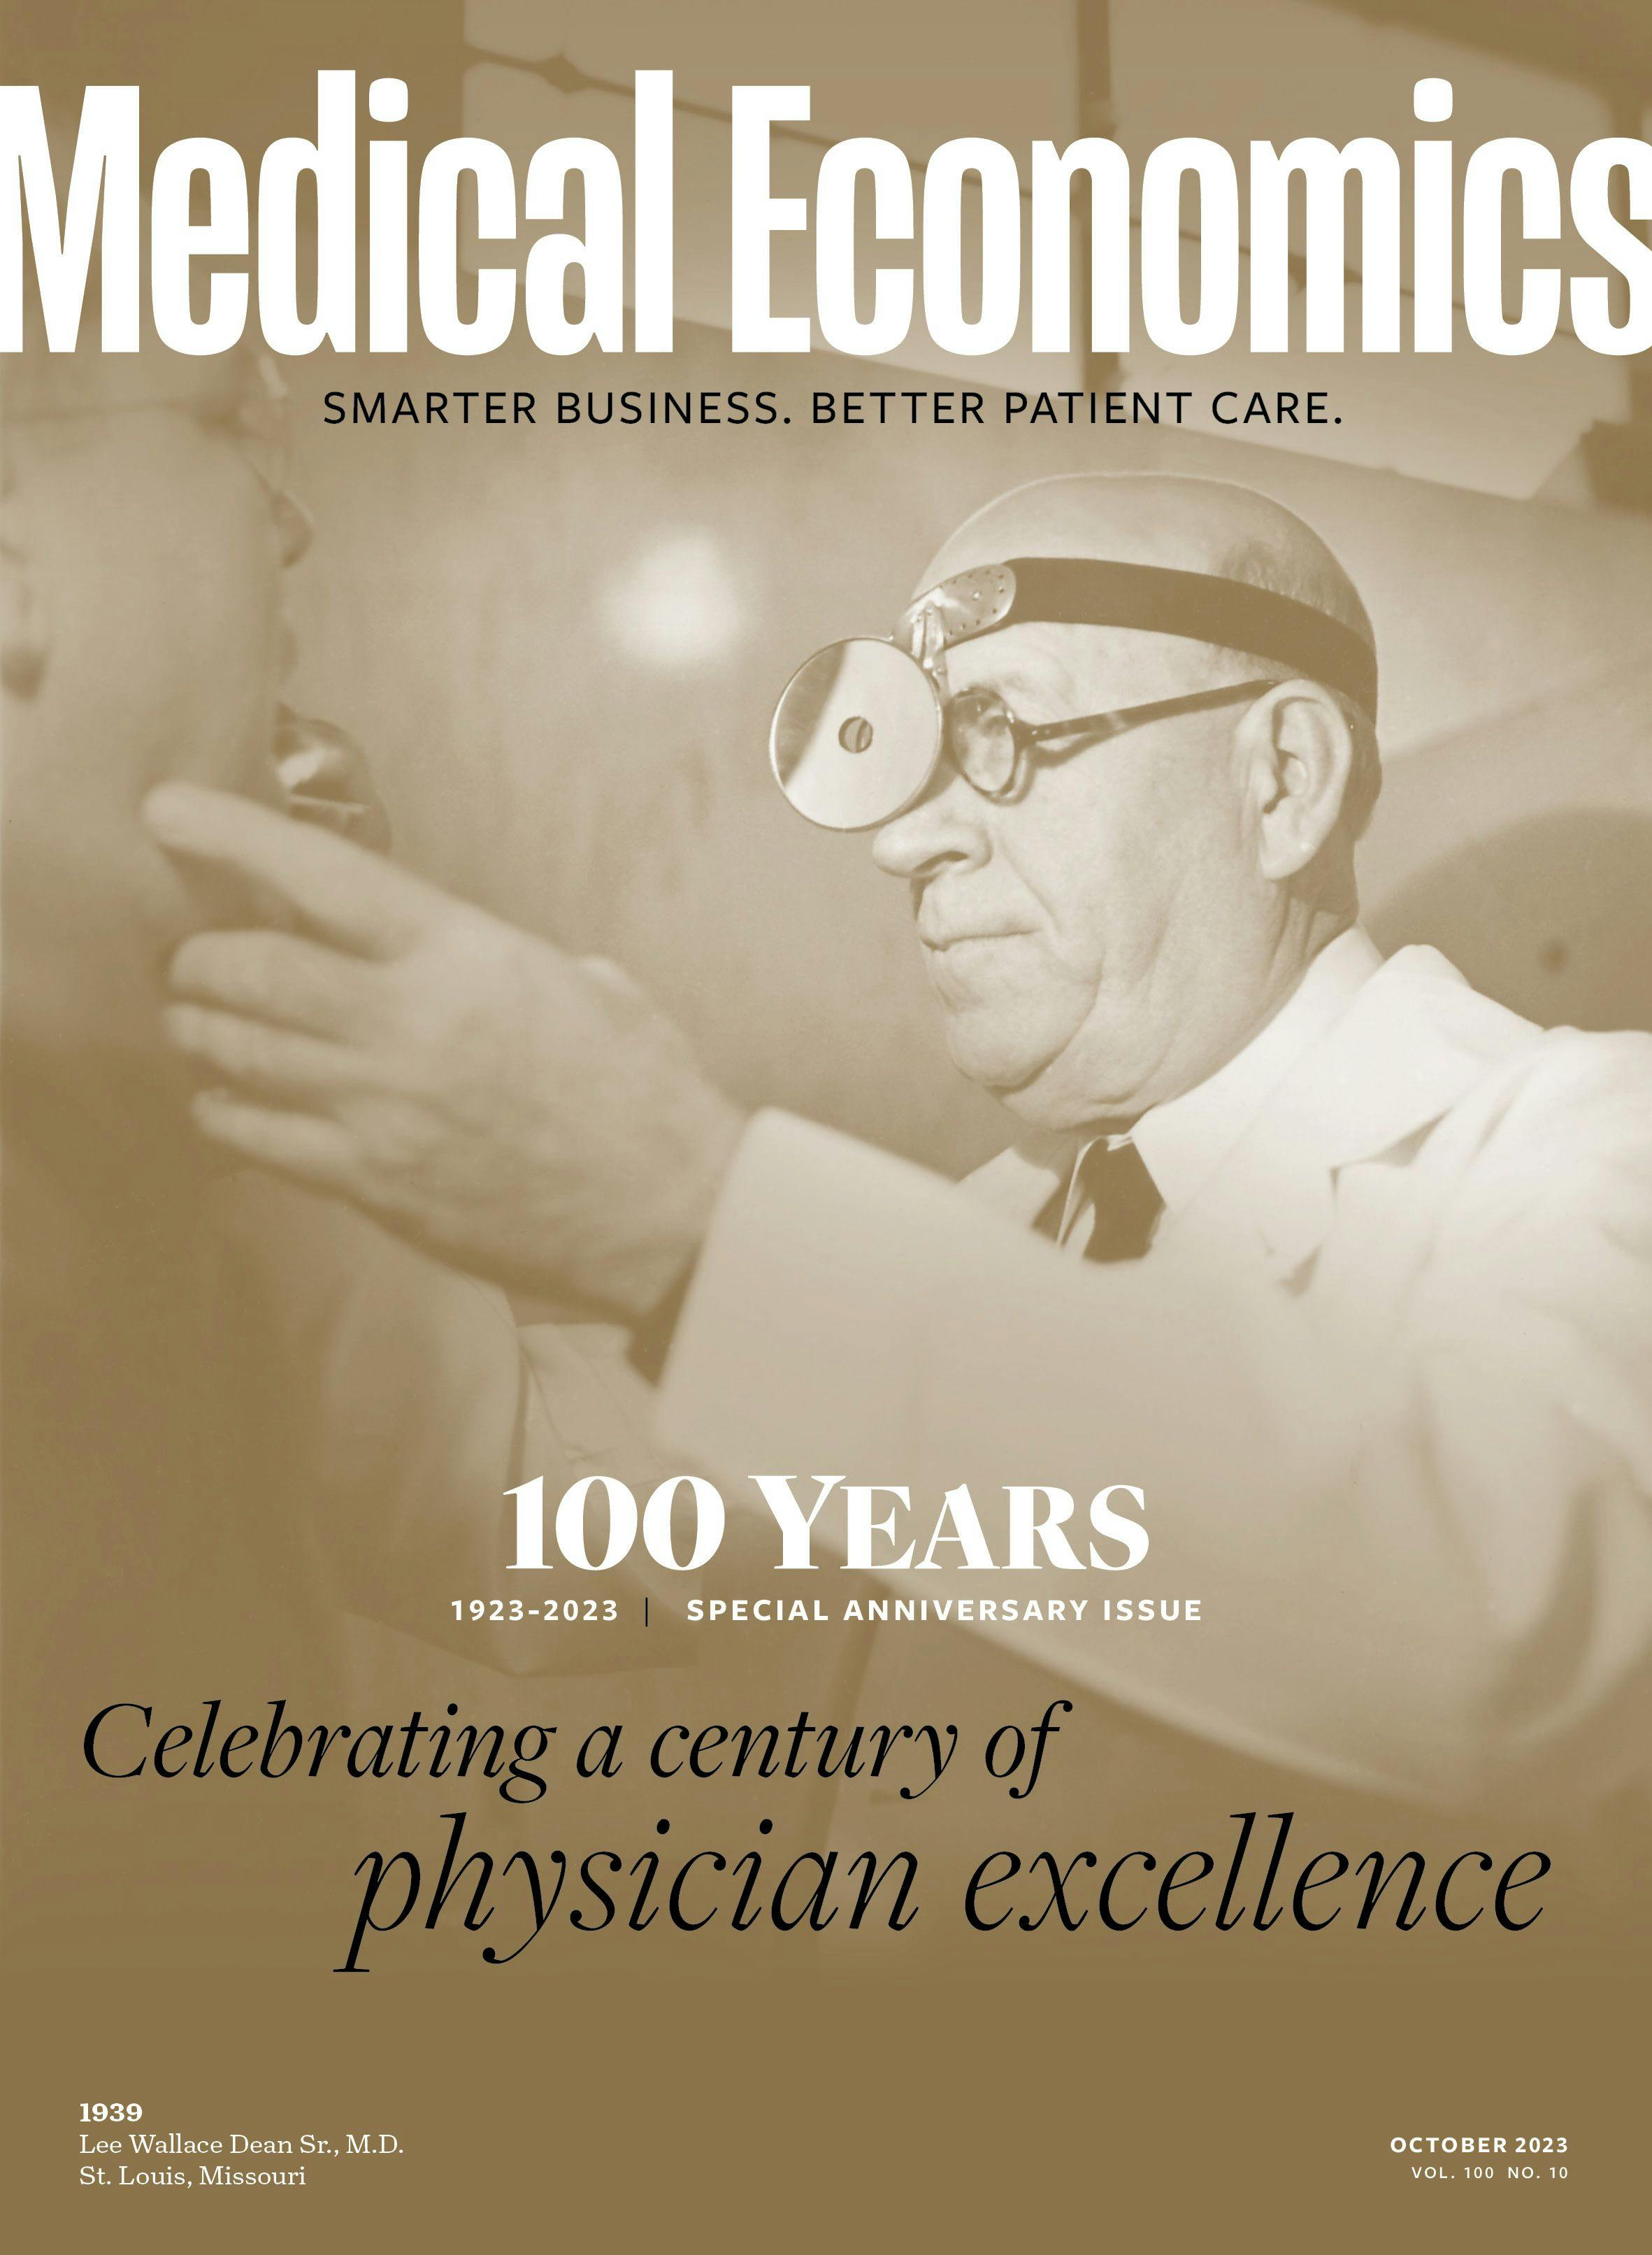 Check out the digital version of the 100th anniversary issue